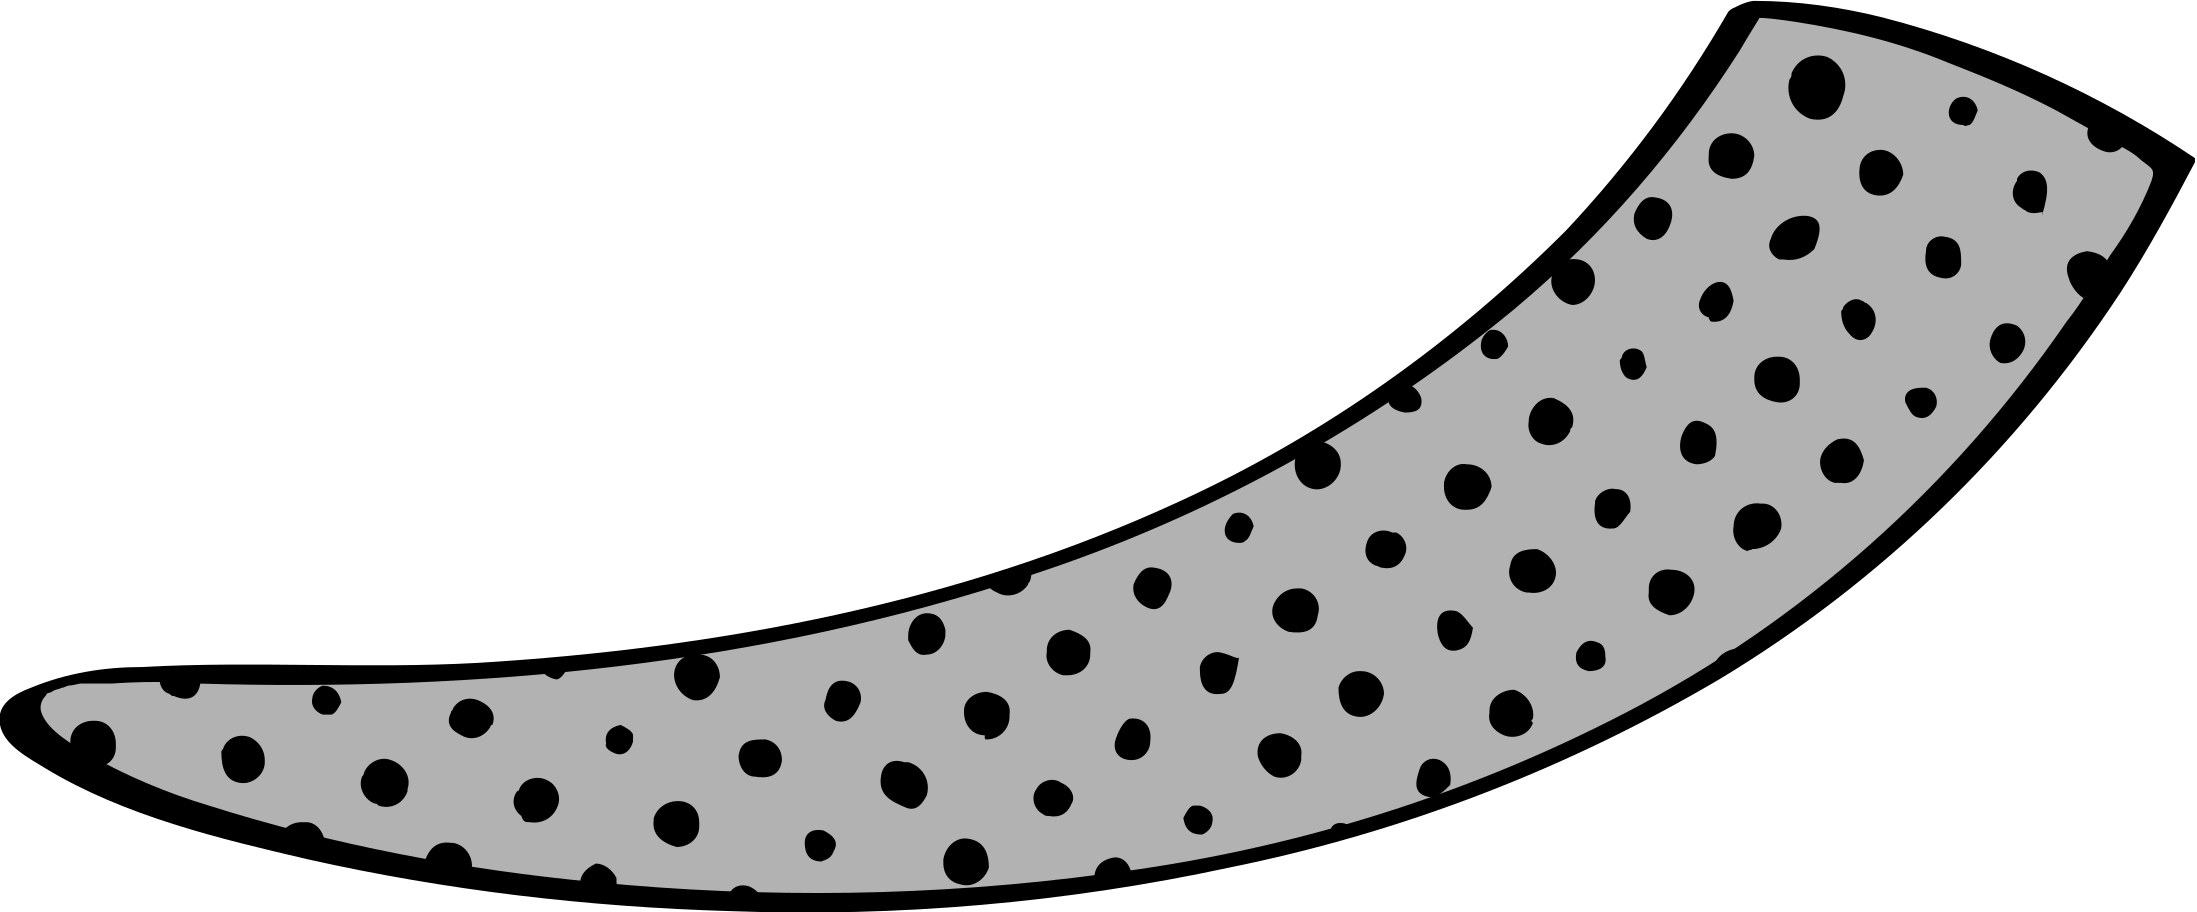 tail Illustration in PNG, SVG